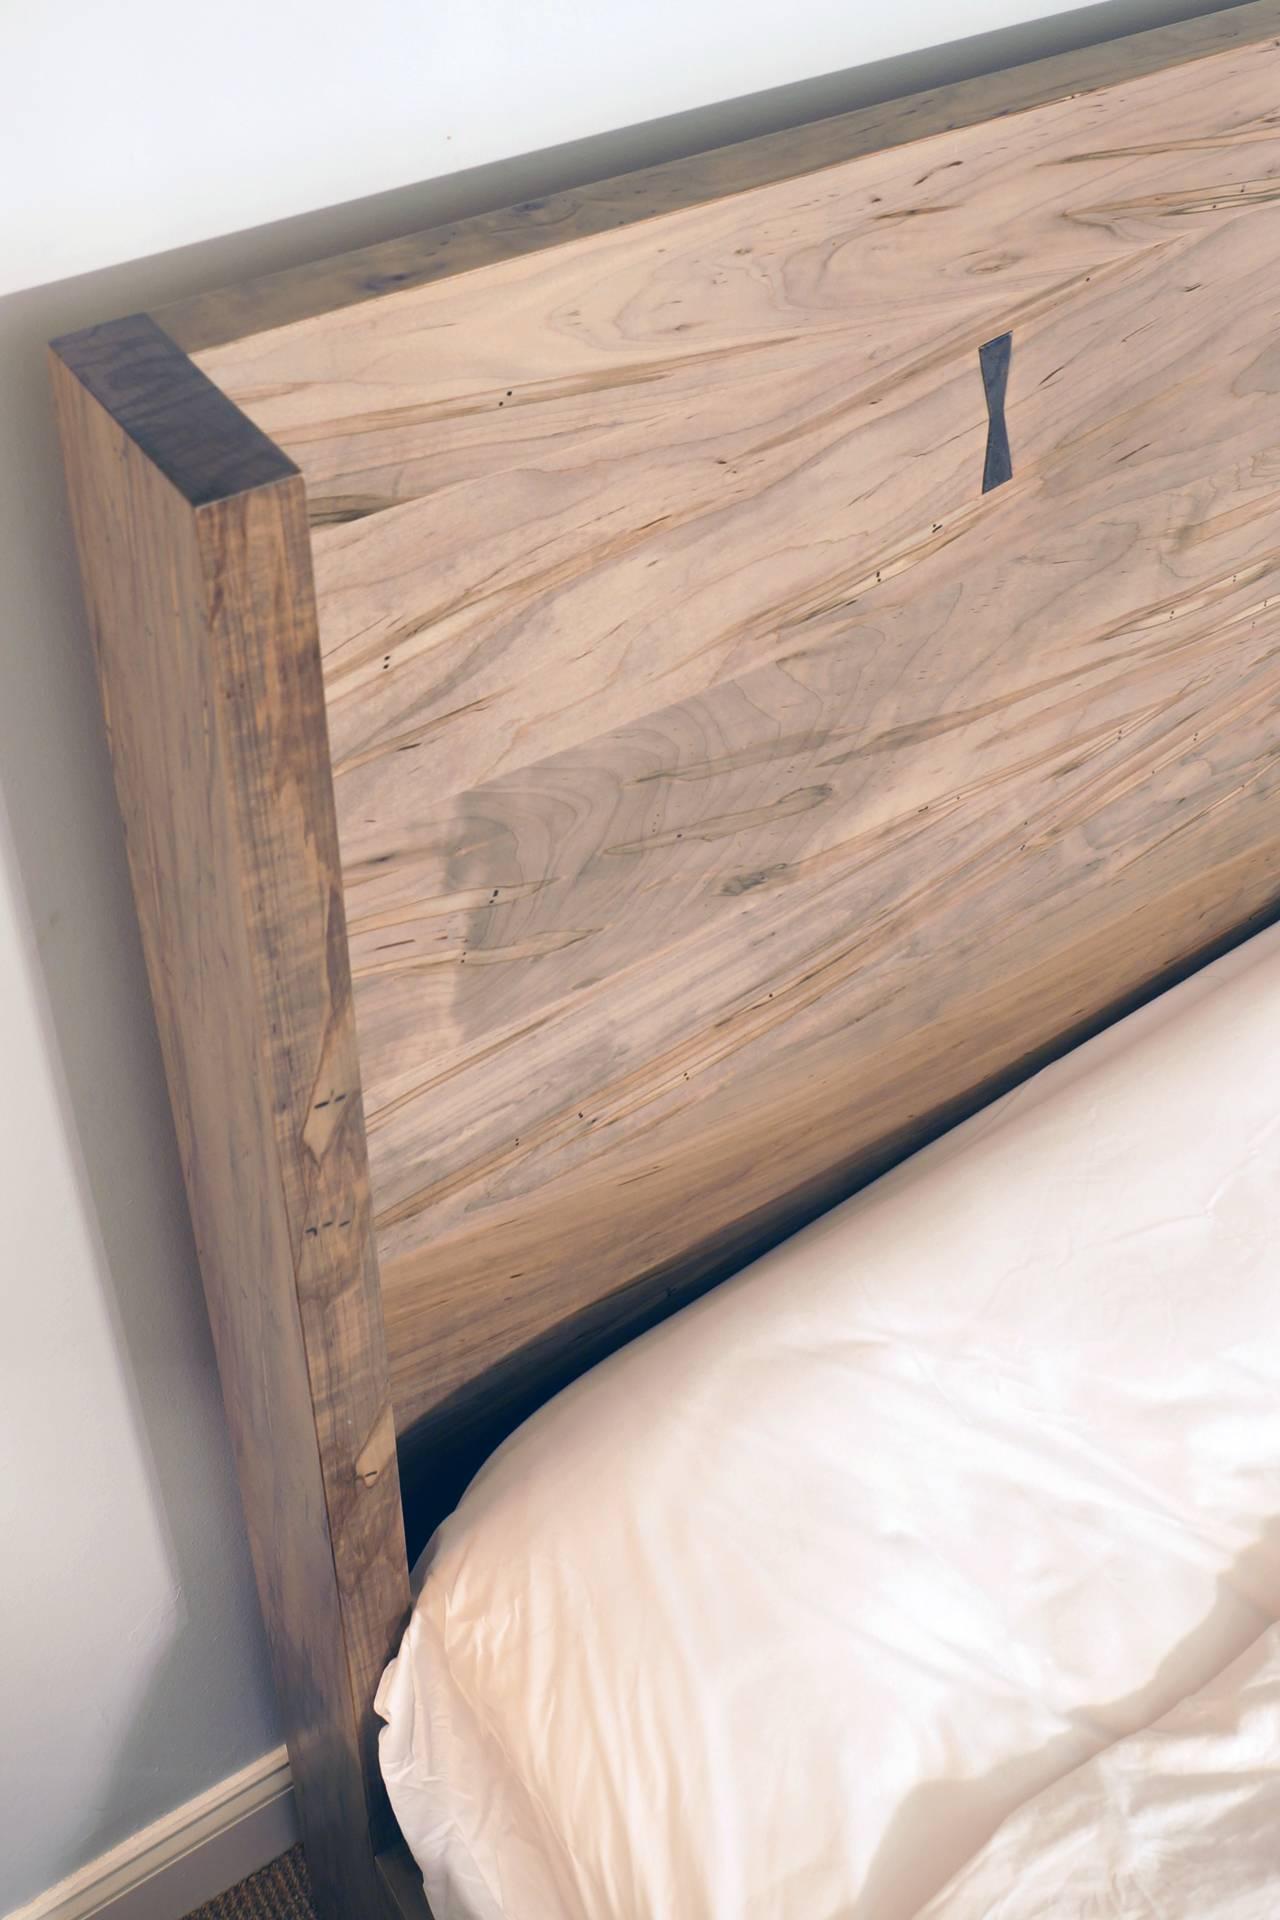 A sunday bed by BDDW. Of solid American holly featuring three sterling silver inlays.